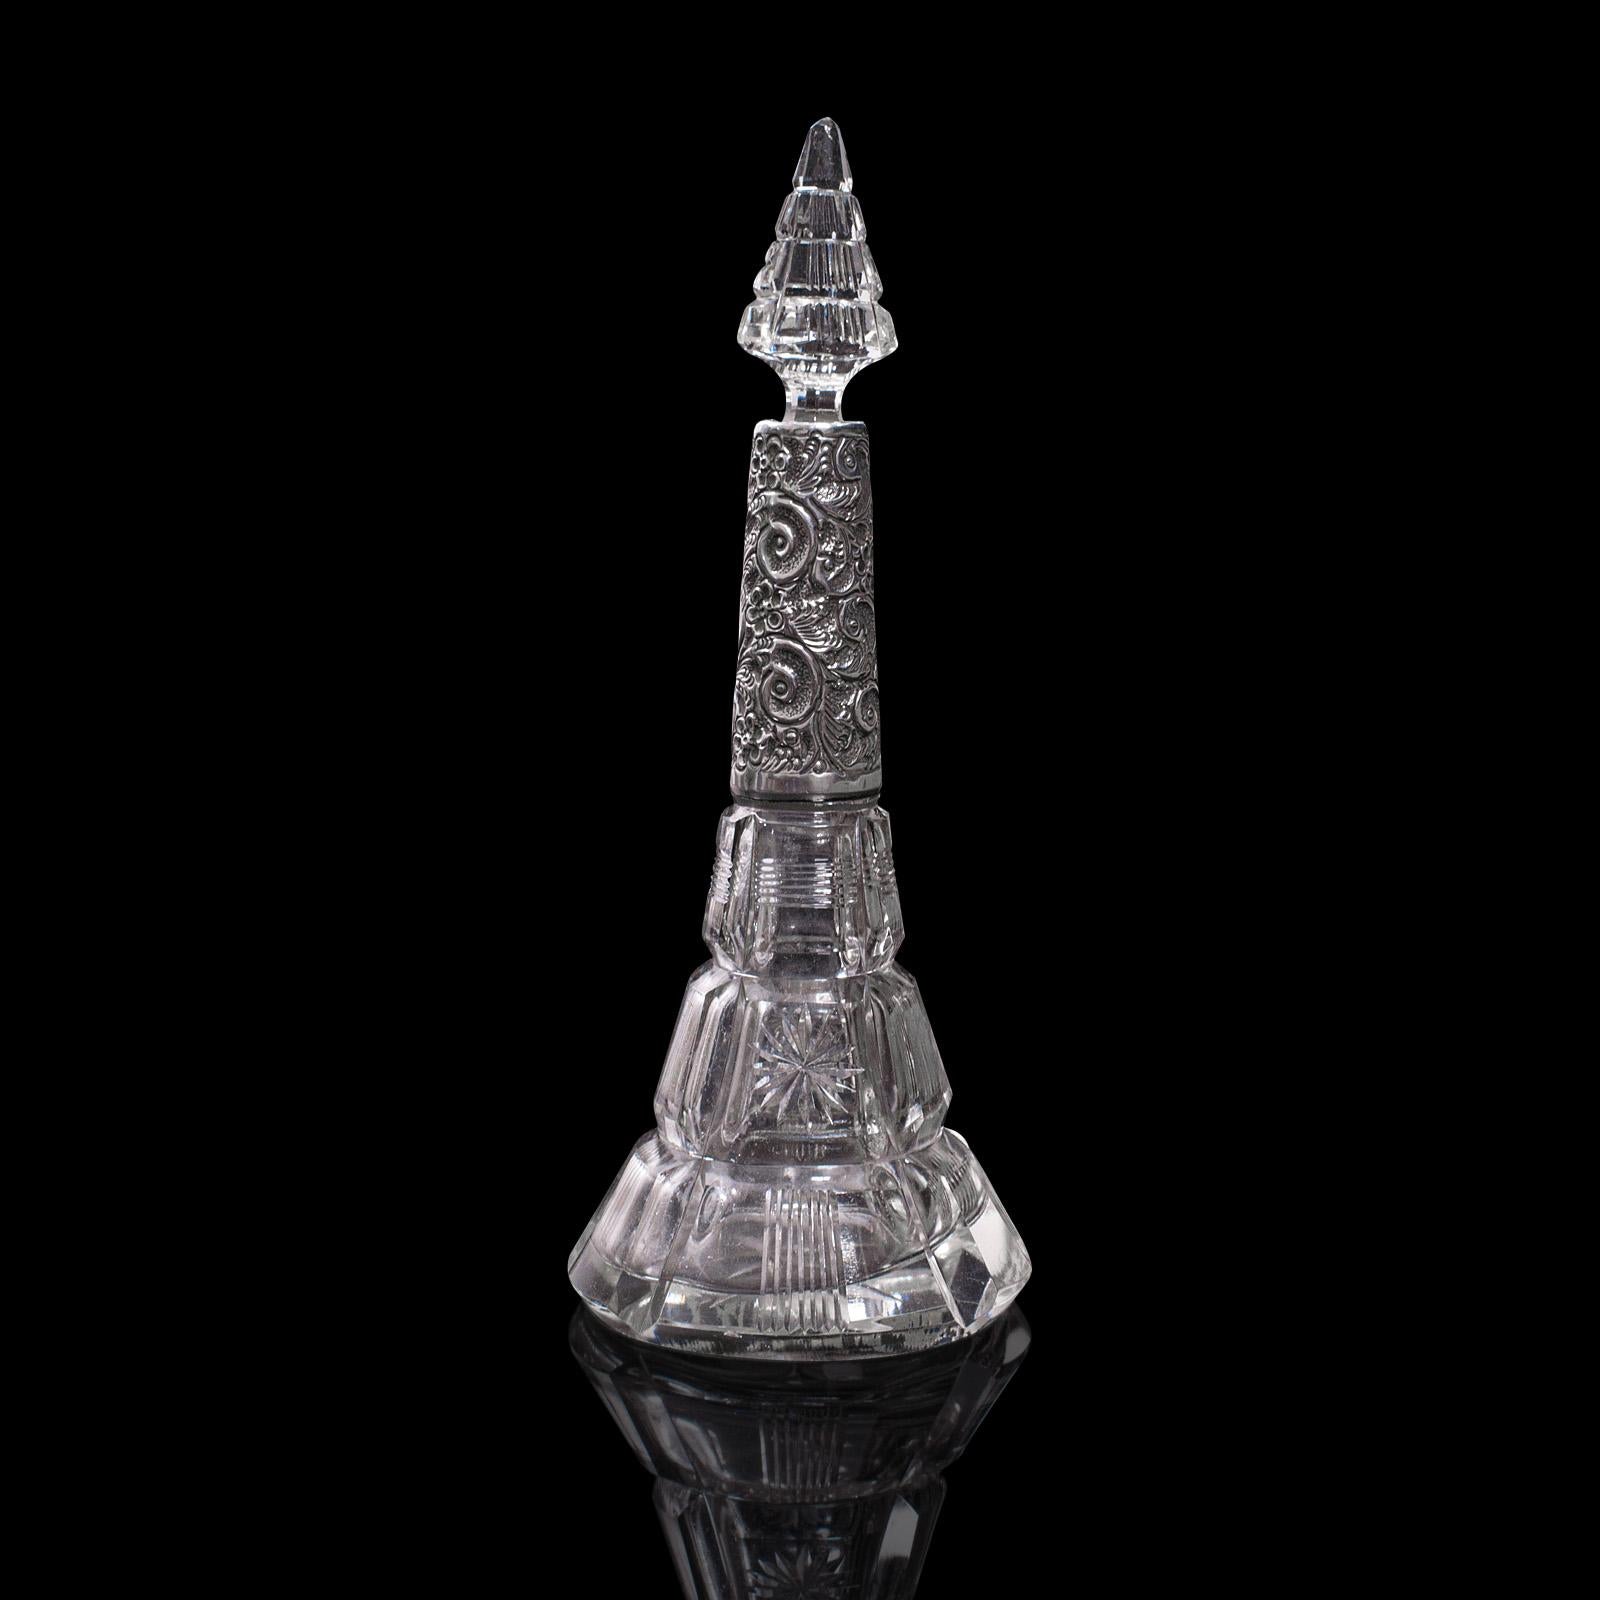 Cut Glass Antique Scent Bottle, English, Glass, Silver, Perfume, Hallmarked, London, 1912